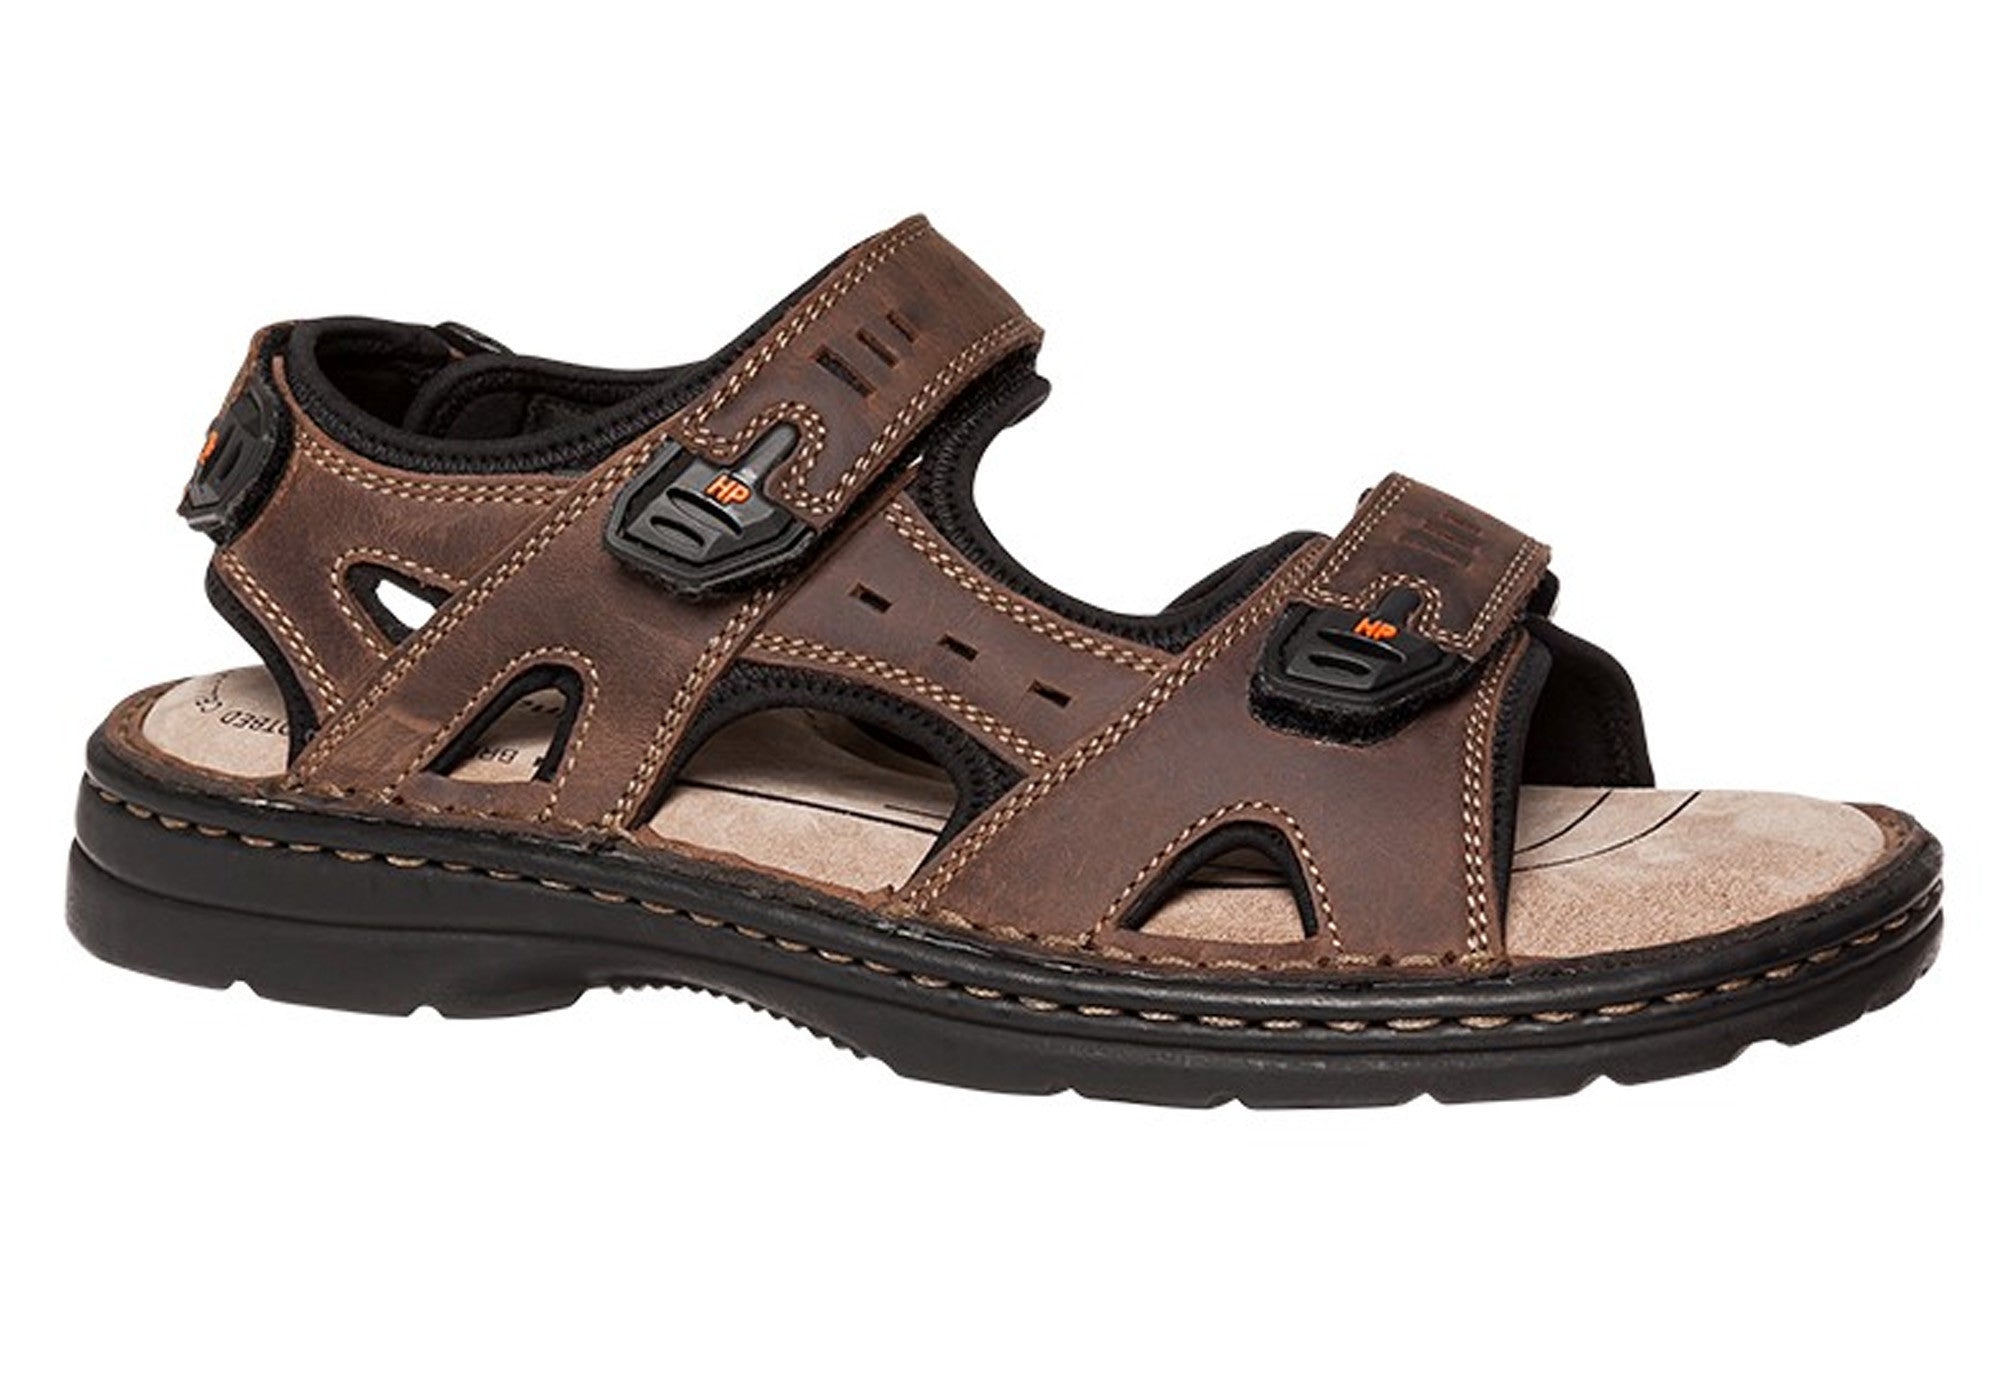 NEW HUSH  PUPPIES  SIMMER MENS WIDE FIT SANDALS  eBay